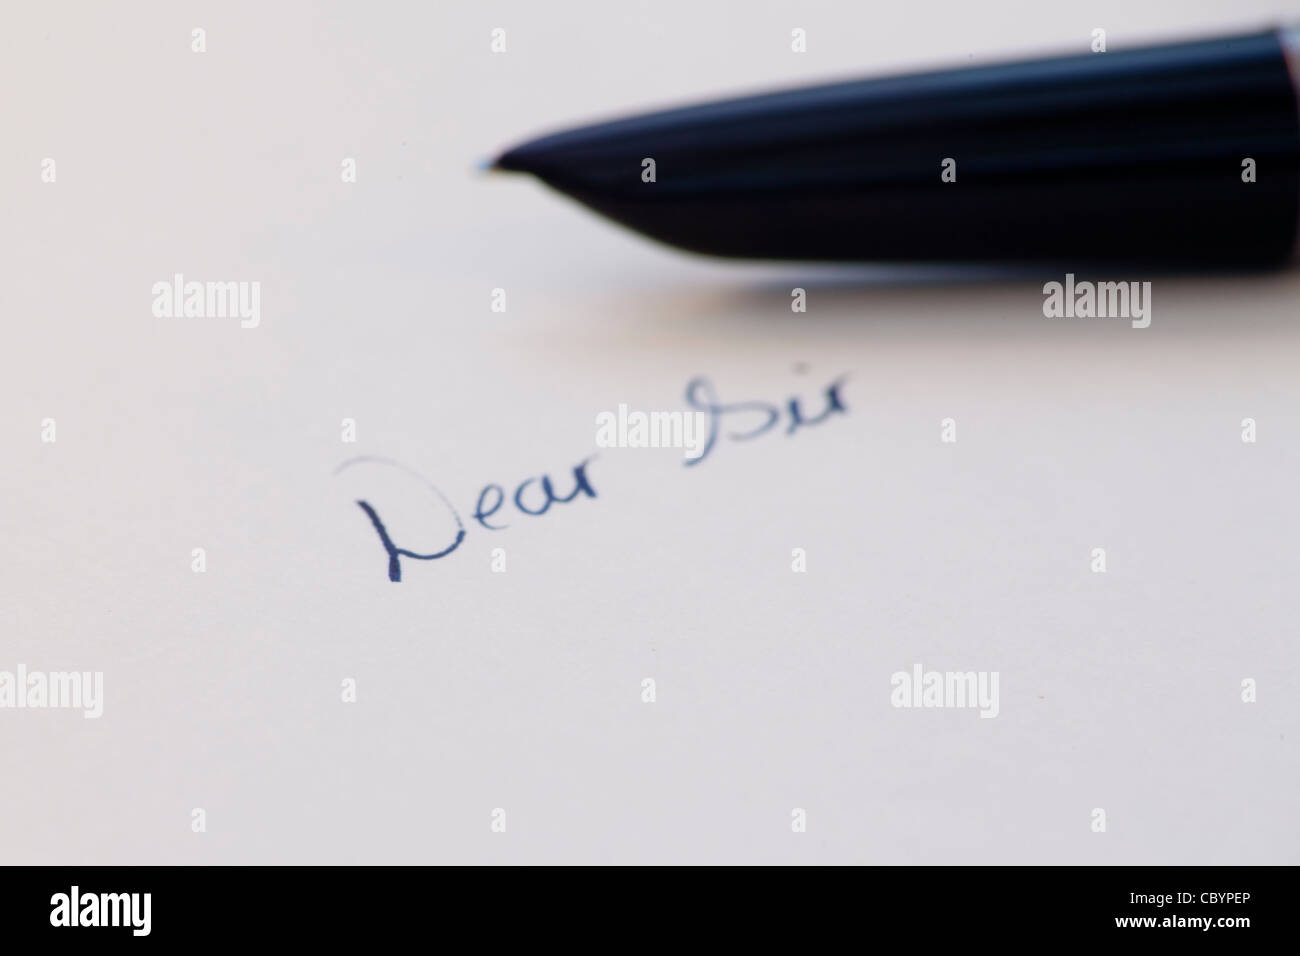 the words 'Dear Sir' handwritten in ink with fountain pen in background Stock Photo